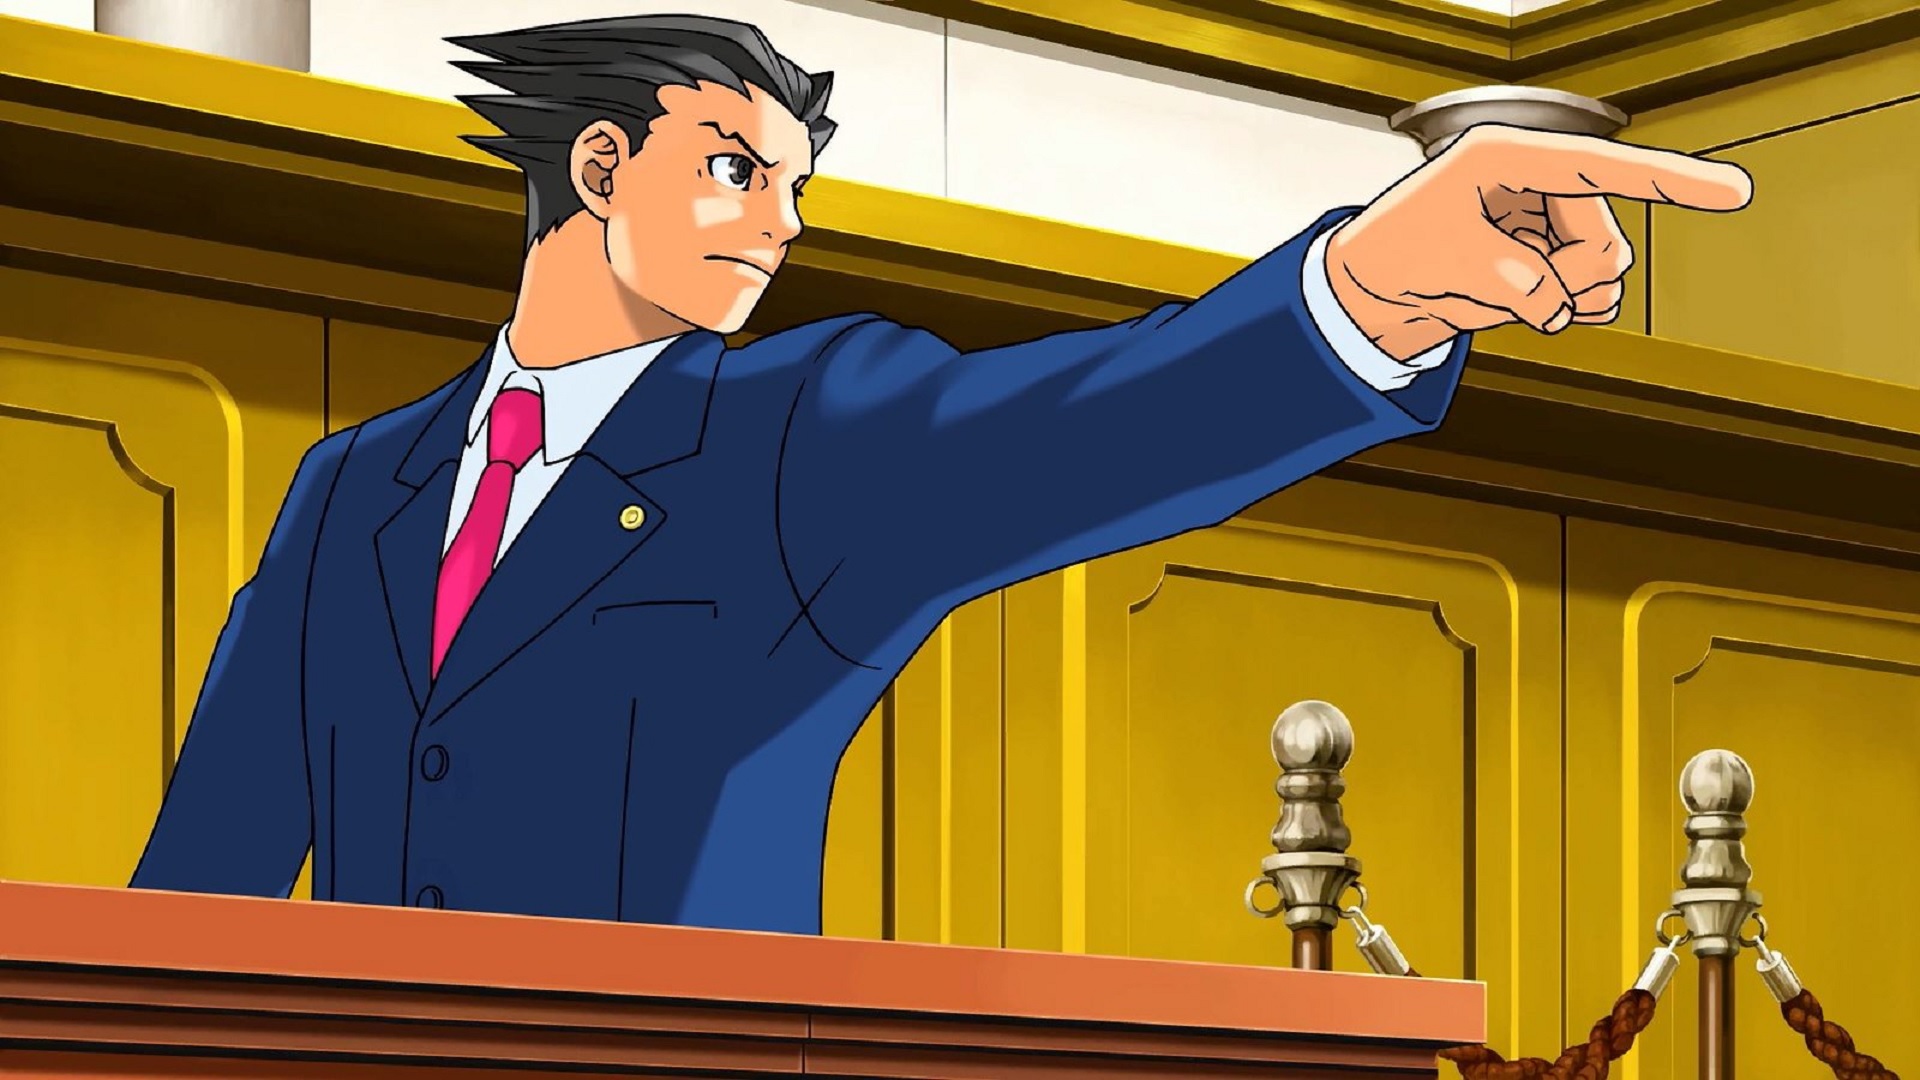 Best anime games: Phoenix Wright: Ace Attorney trilogy. Image shows Phoenix himself pointing across the courtroom.